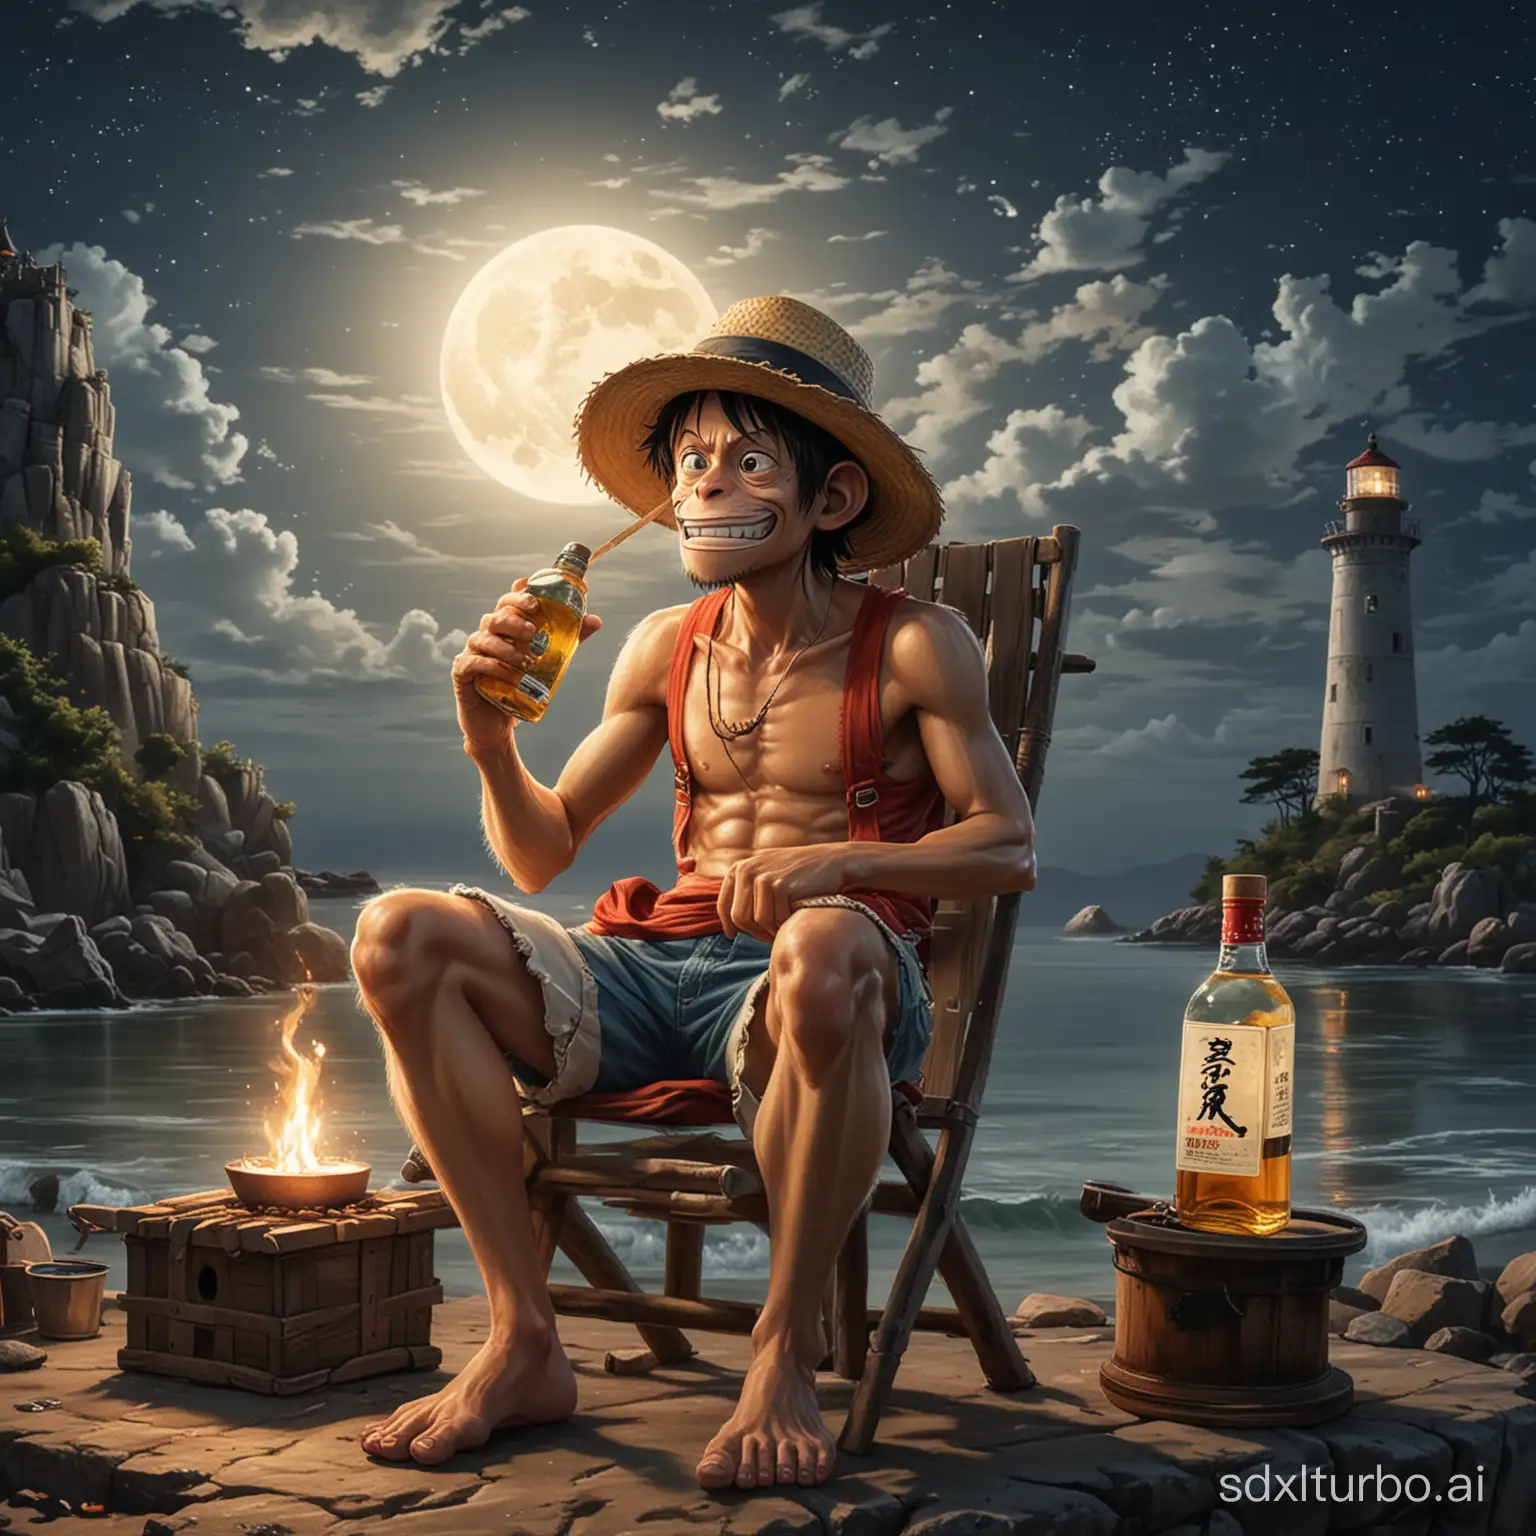 Monkey man Luffy wearing a straw hat, sitting on a small chair holding a soju bottle while grilling fish, front view. with the full moon background of an ancient lighthouse.